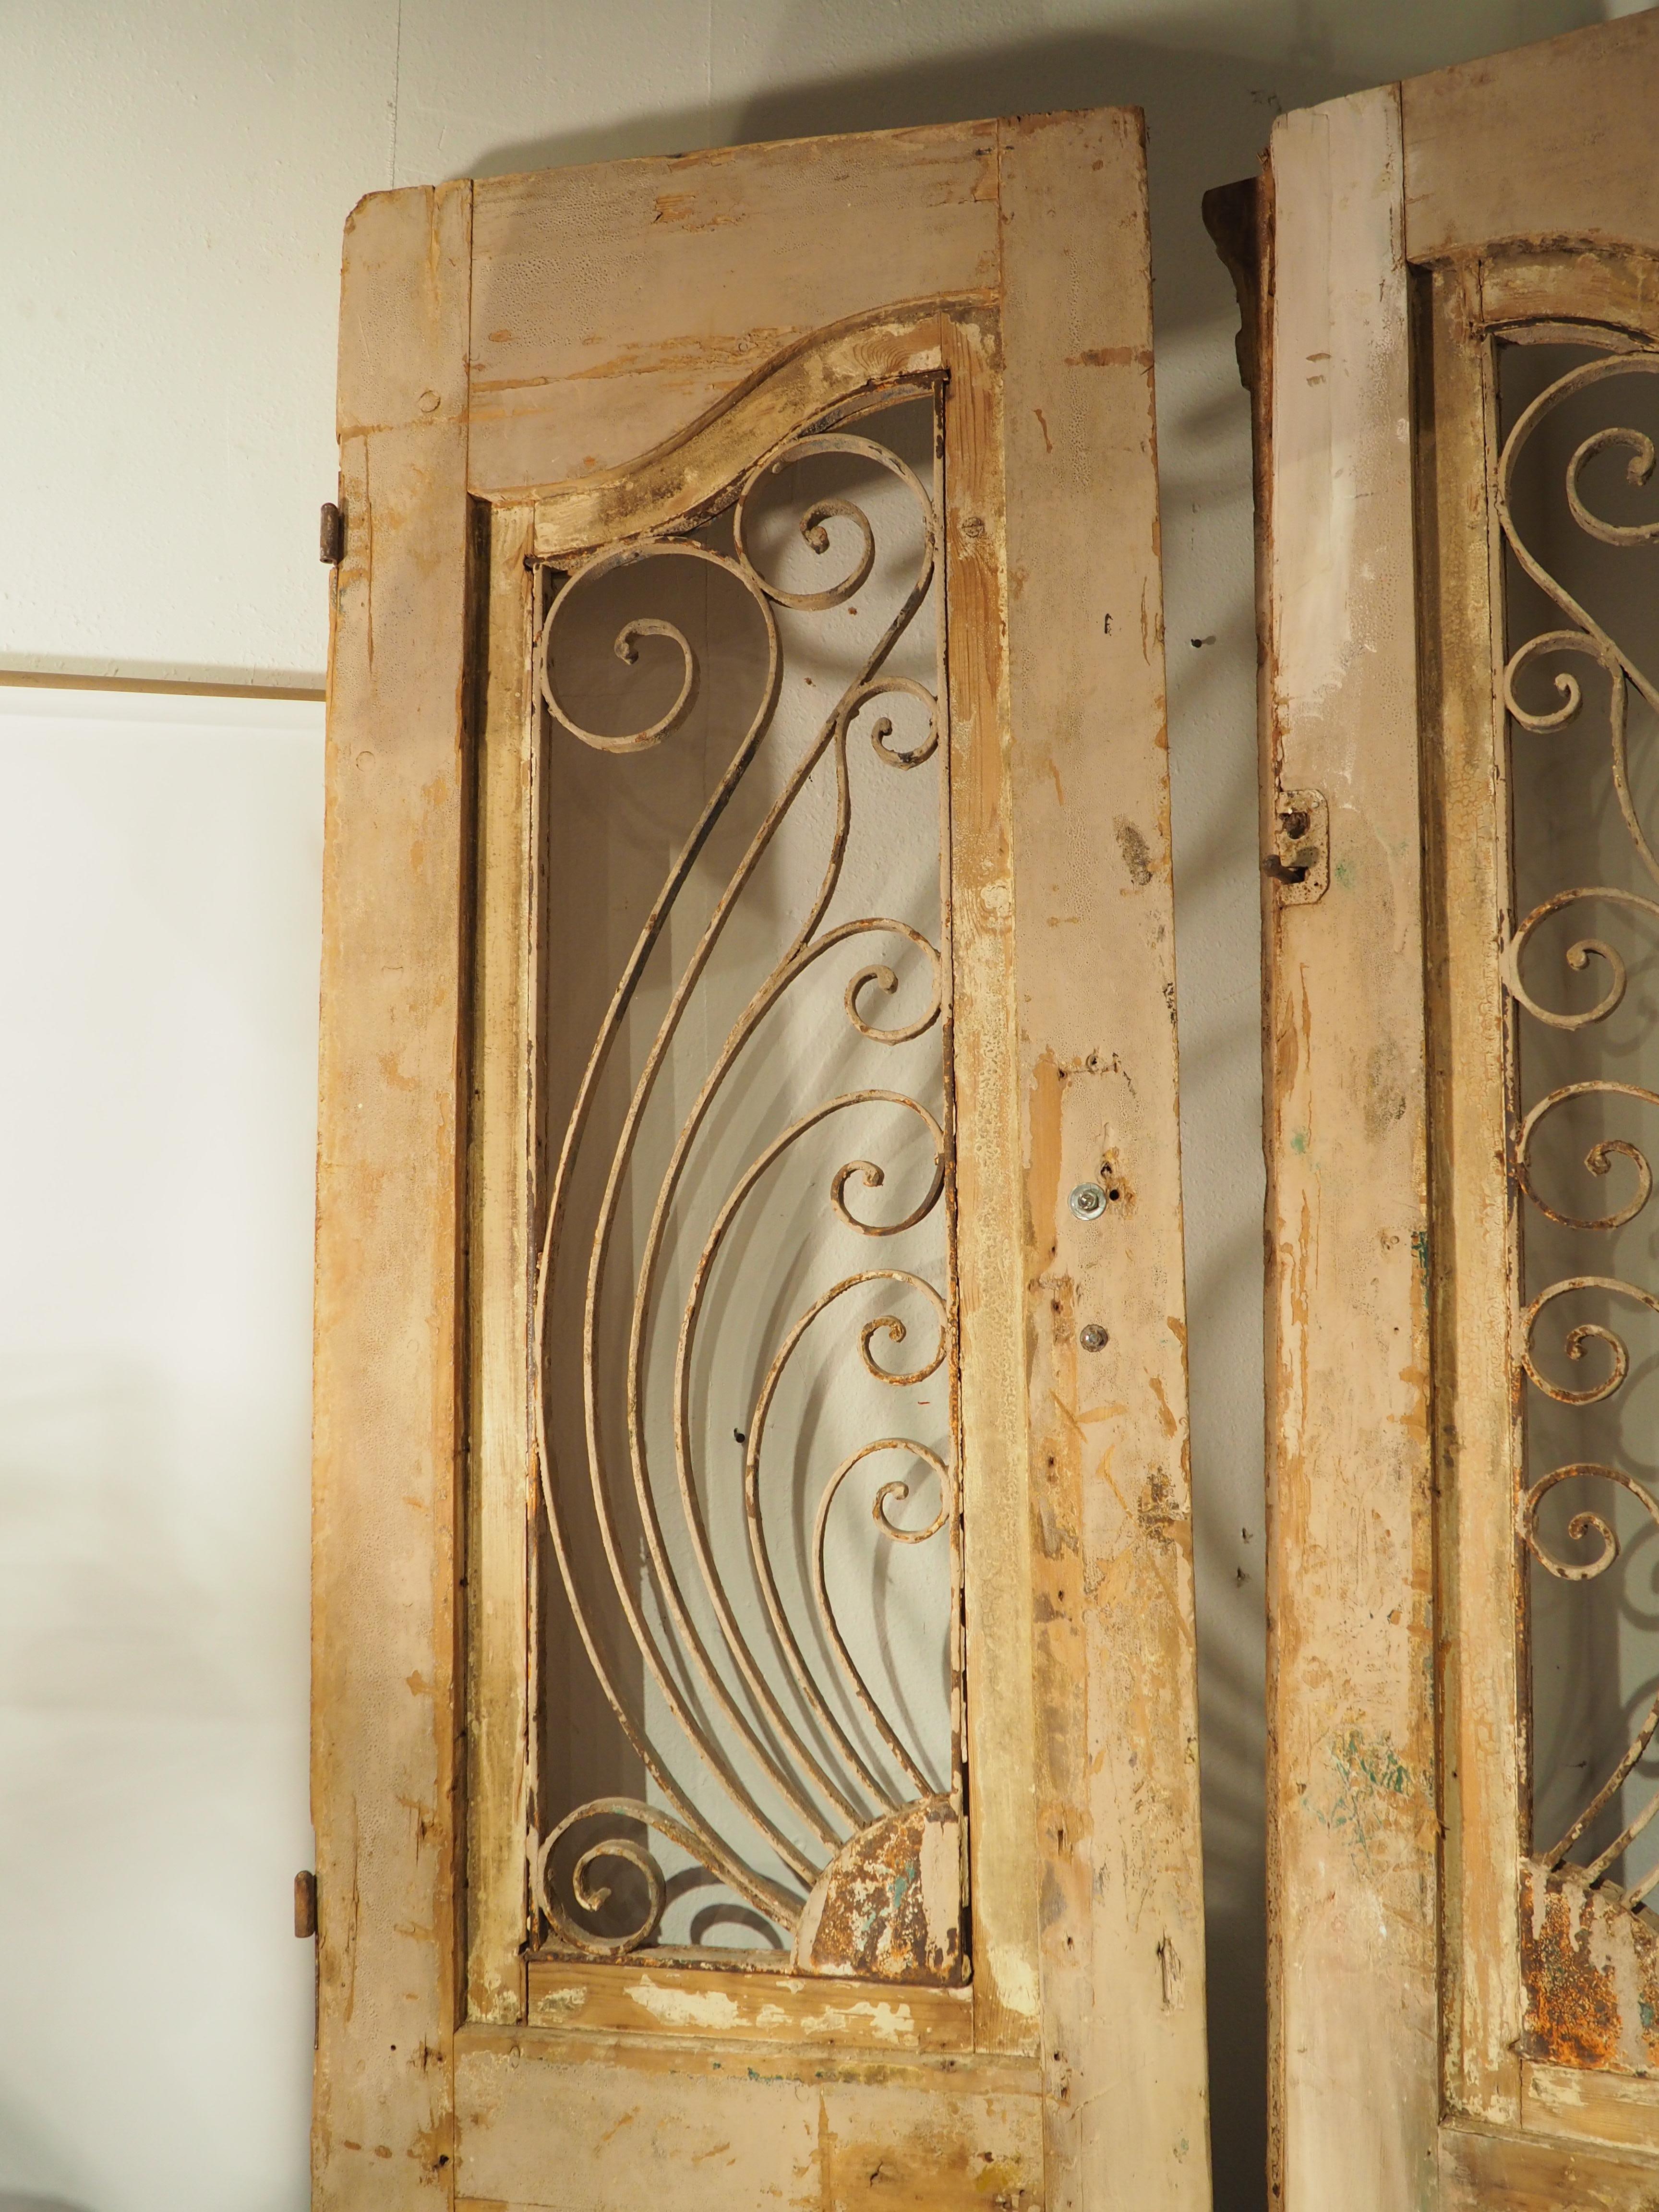 The style of design known as Art Nouveau (roughly 1890-1914), was heavily inspired by nature, resulting in lively furnishings and architecture. A stunning example from this period is our pair of wood and iron doors, hand-carved in France, circa